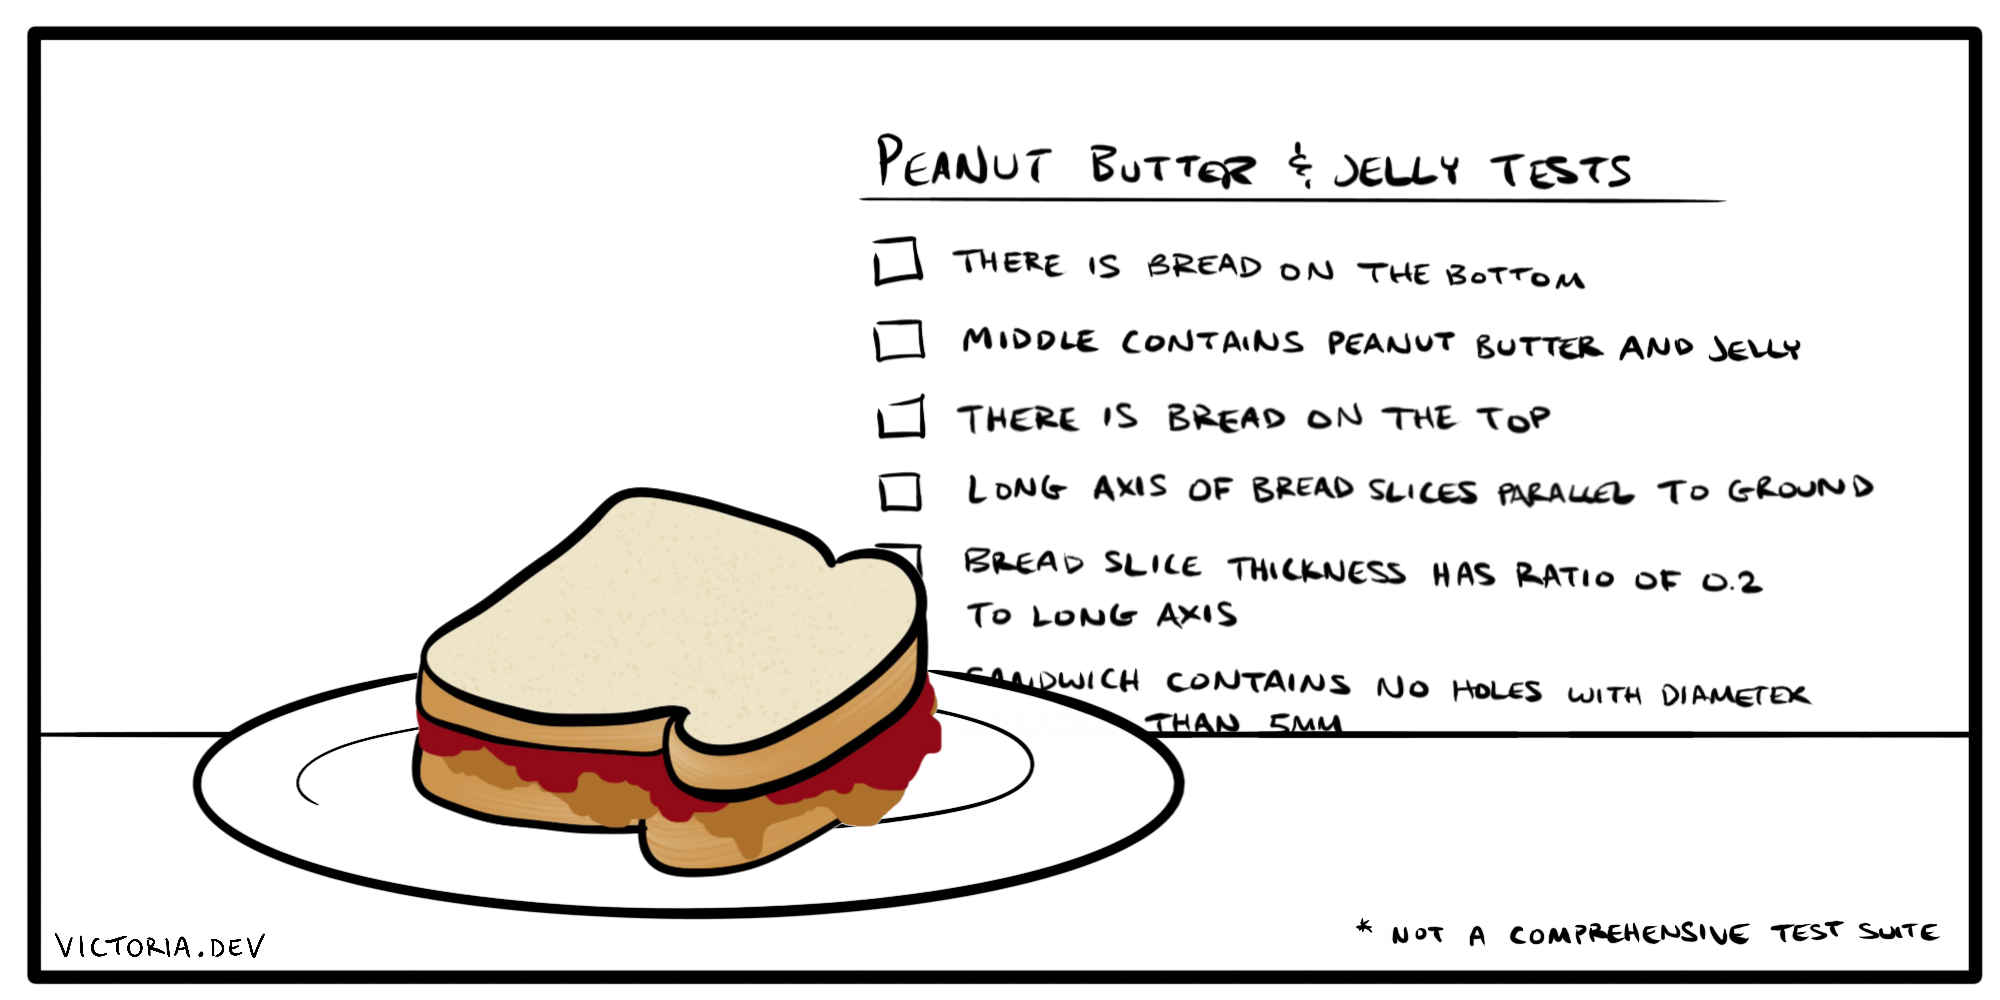 A cartoon for peanut butter and jelly sandwich tests